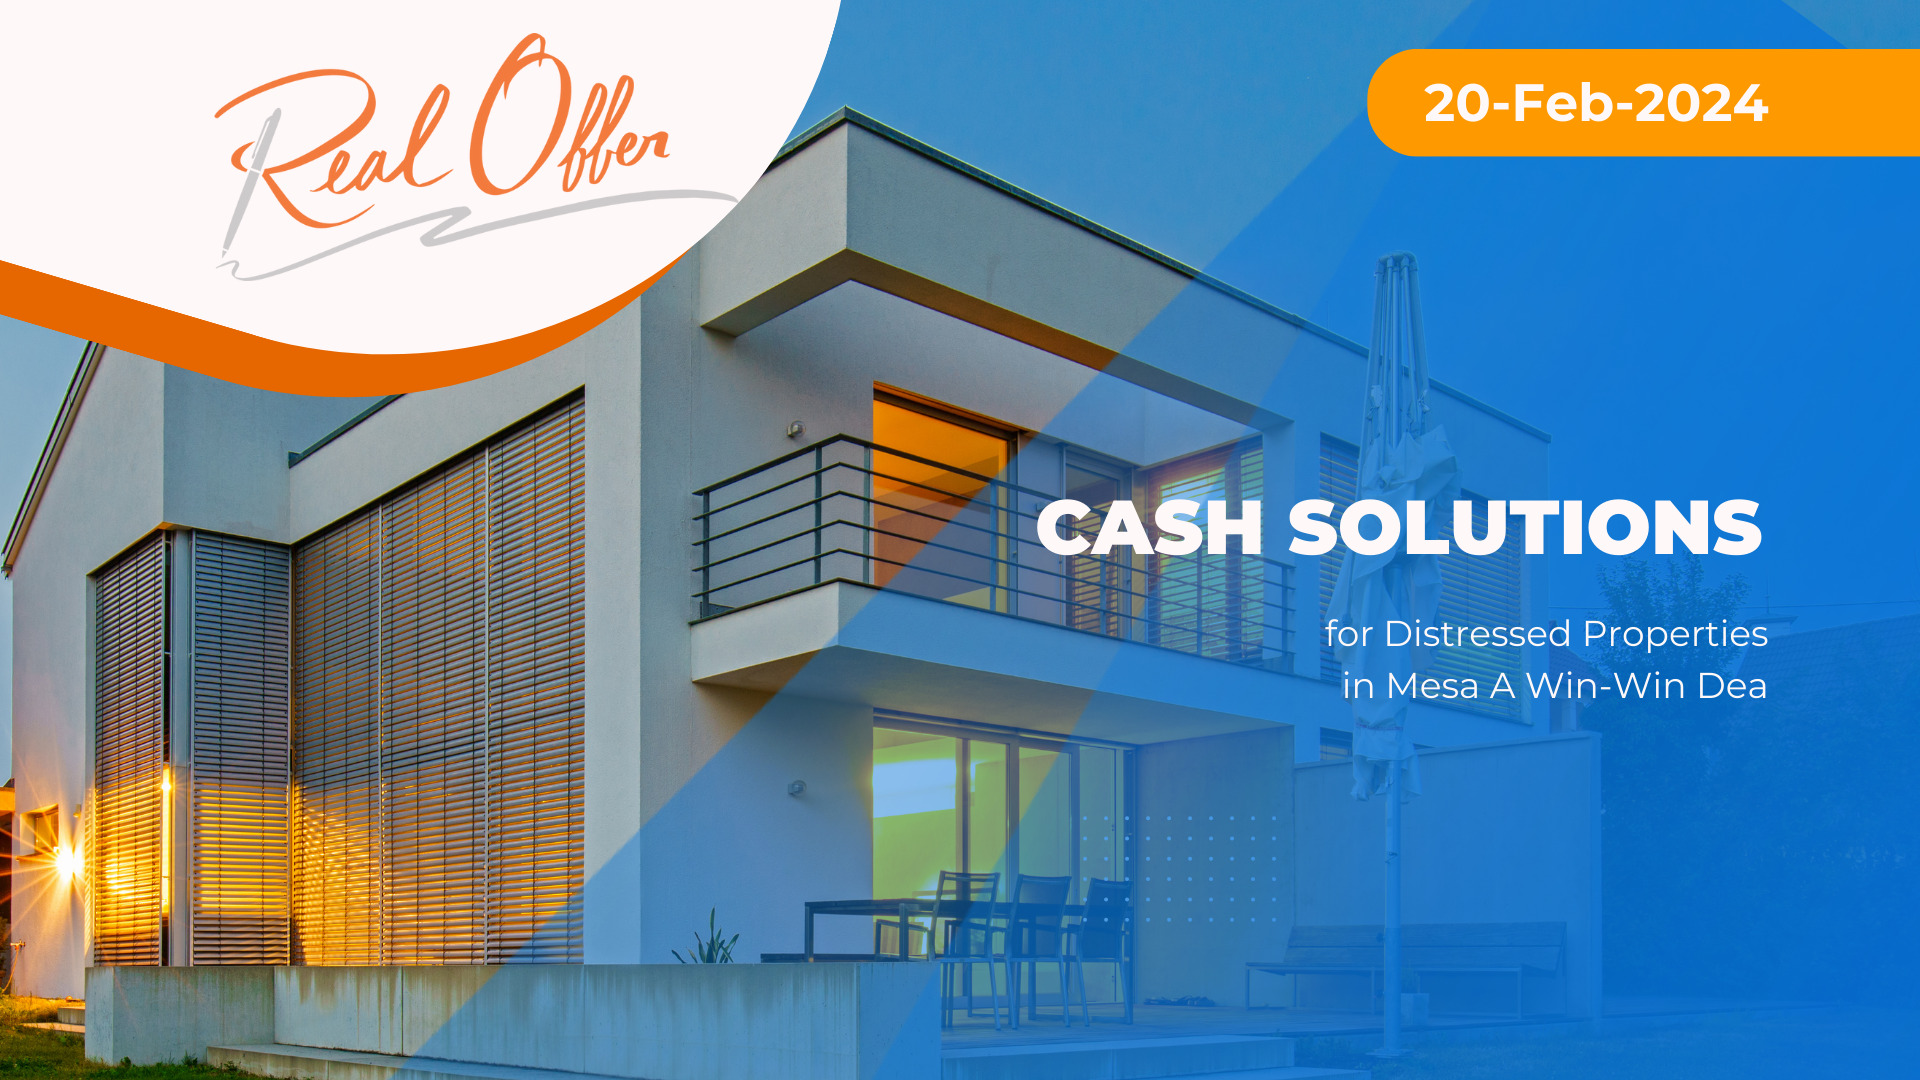 Cash Solutions for Distressed Properties in Mesa: Win-Win Deal